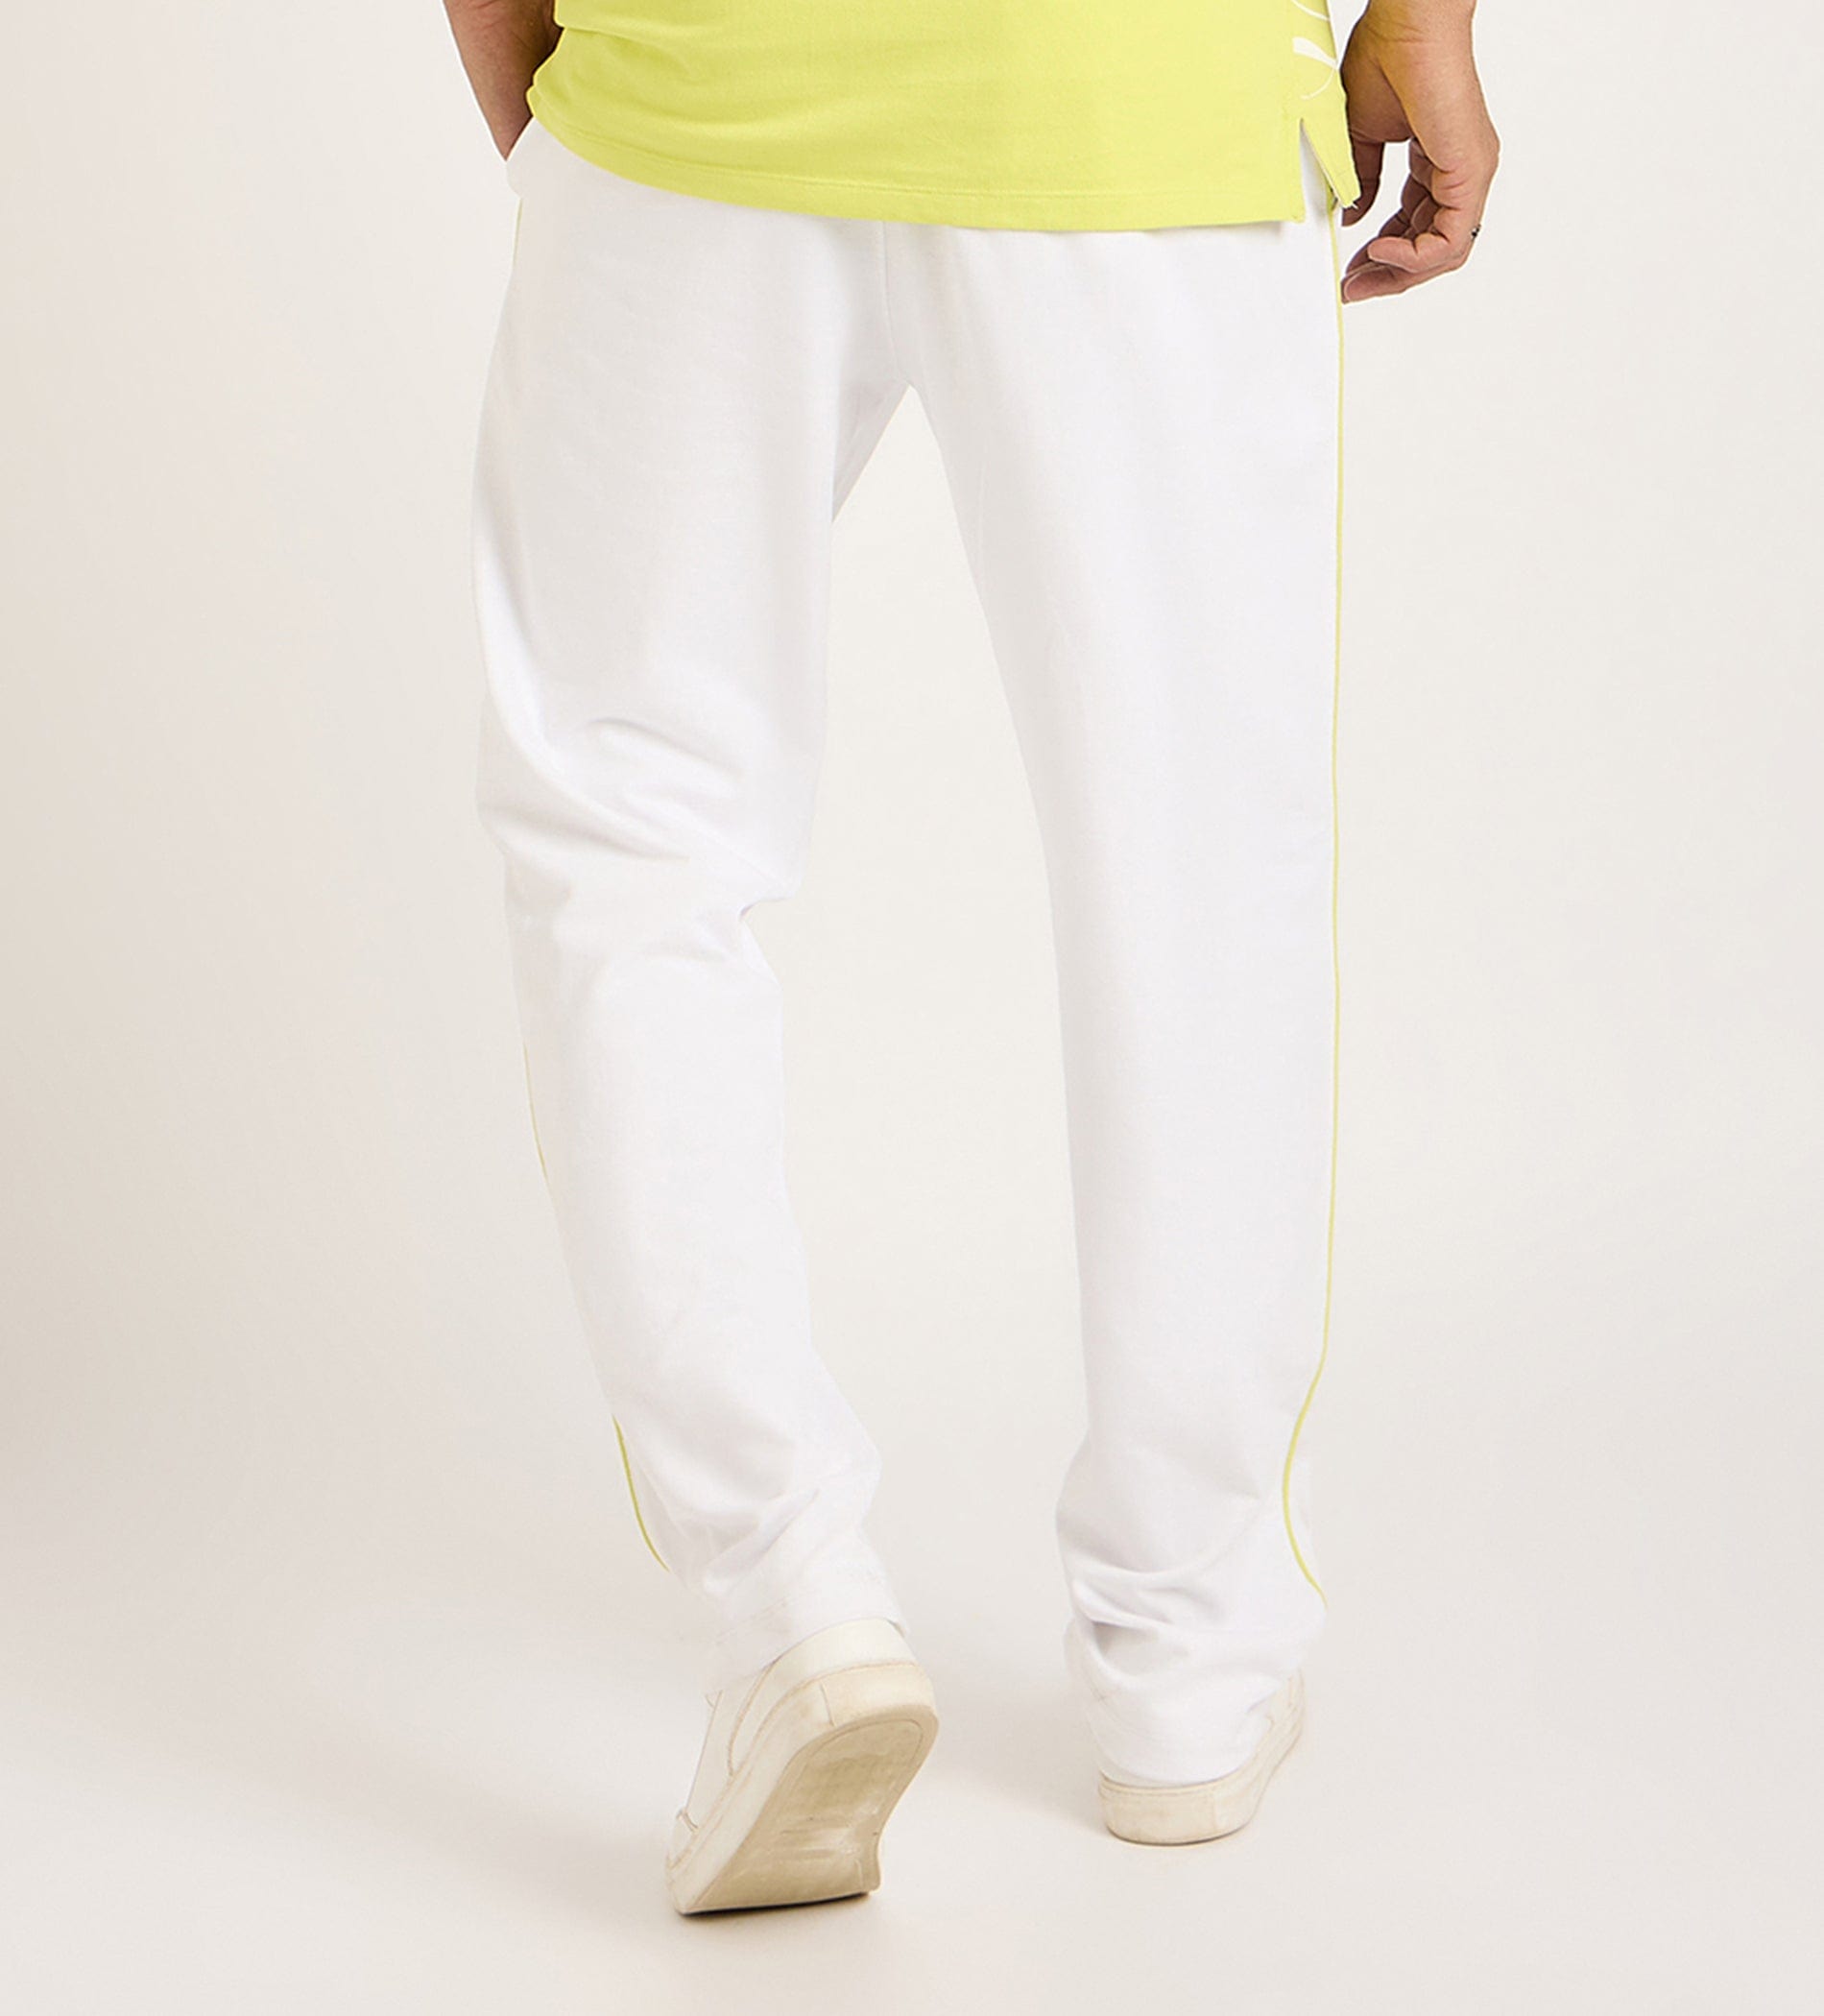 Trackpants Drawstring Trackpants White Trackpants For Men